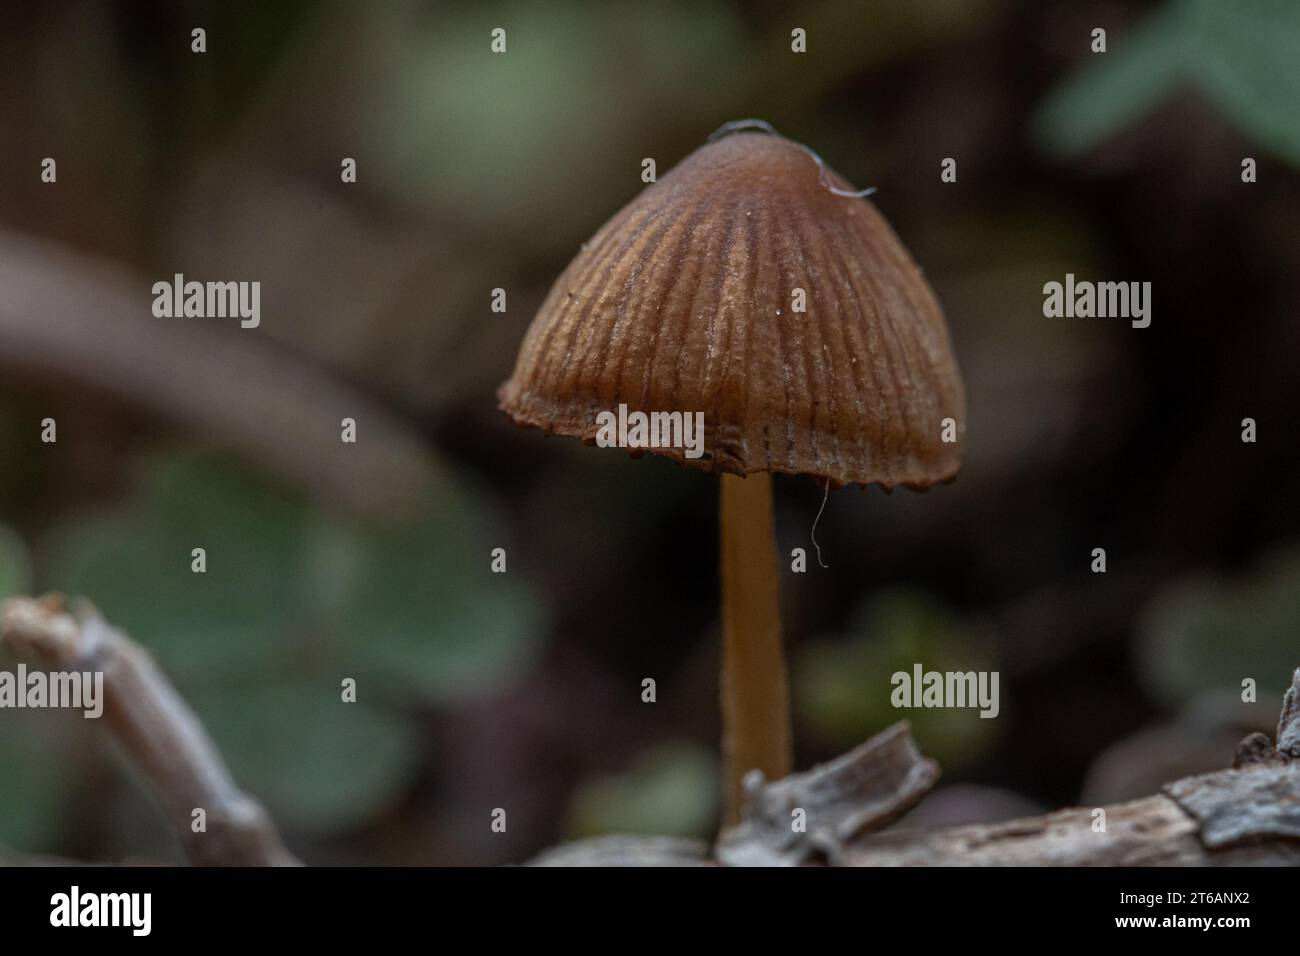 Small mushroom in the foreground in the undergrowth Stock Photo